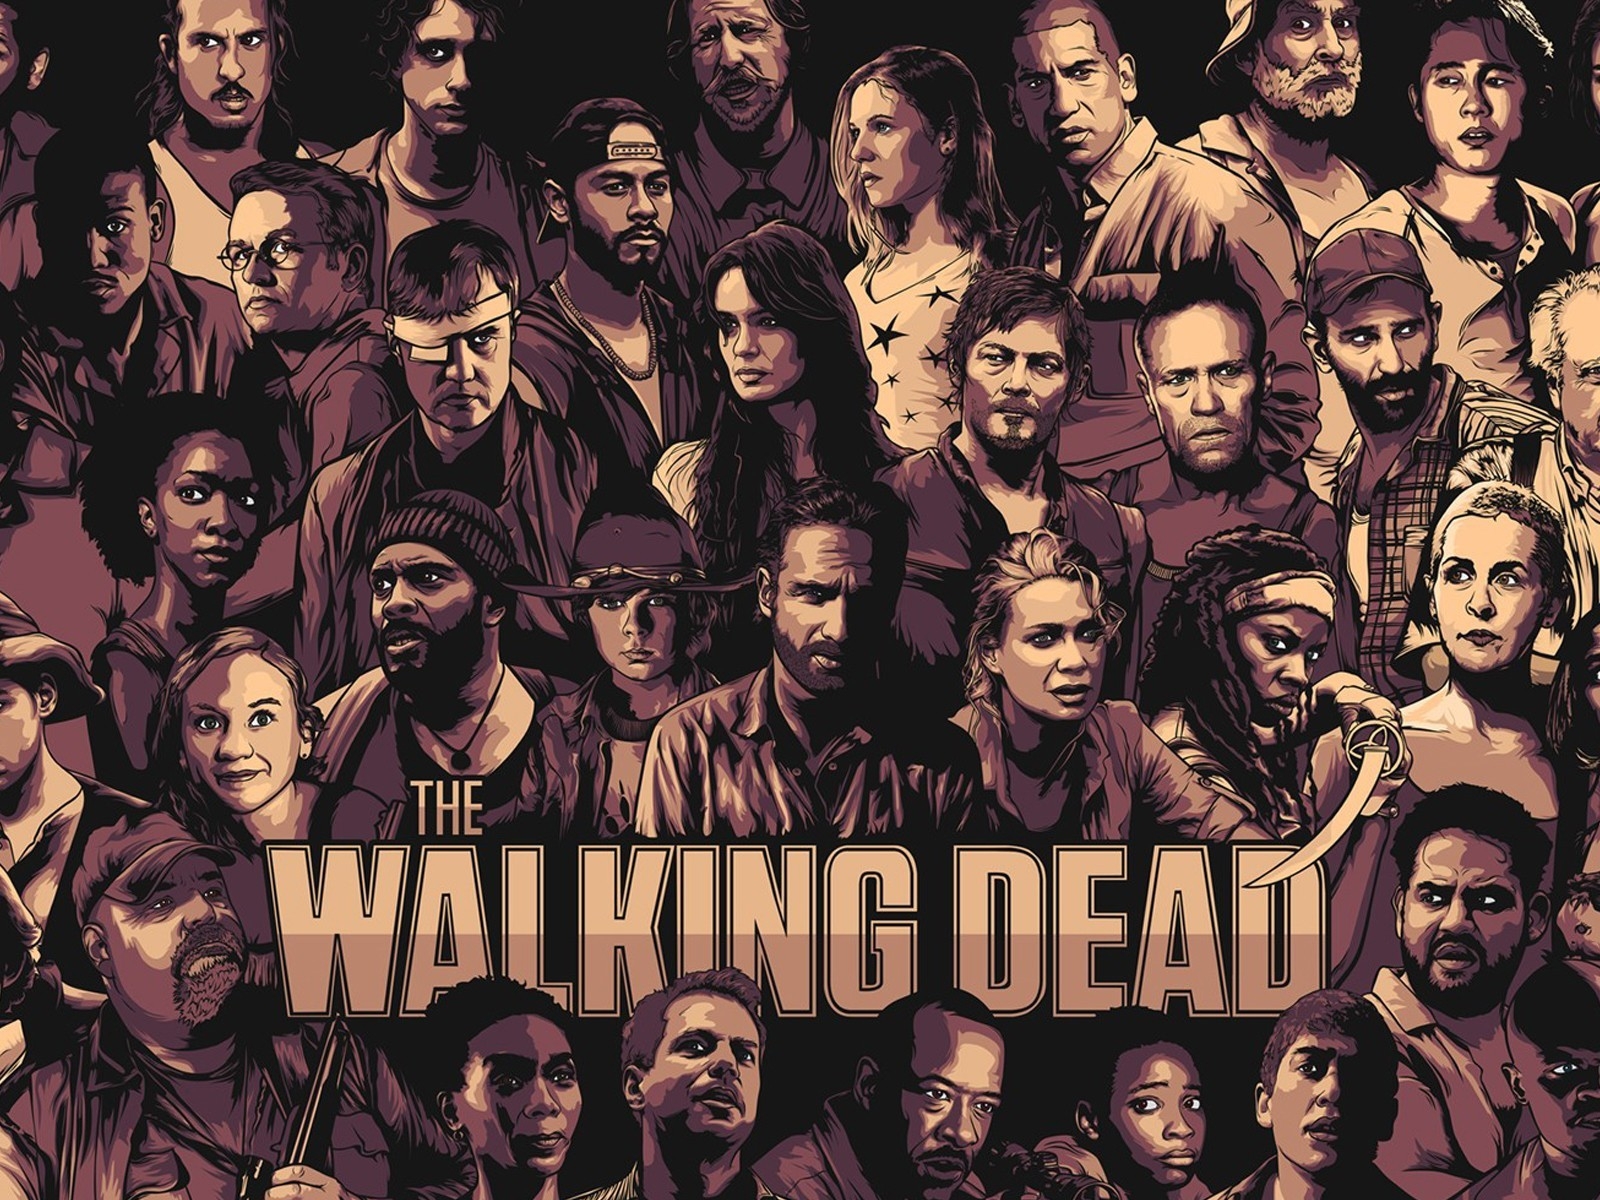 The Walking Dead Cool Poster for 1600 x 1200 resolution